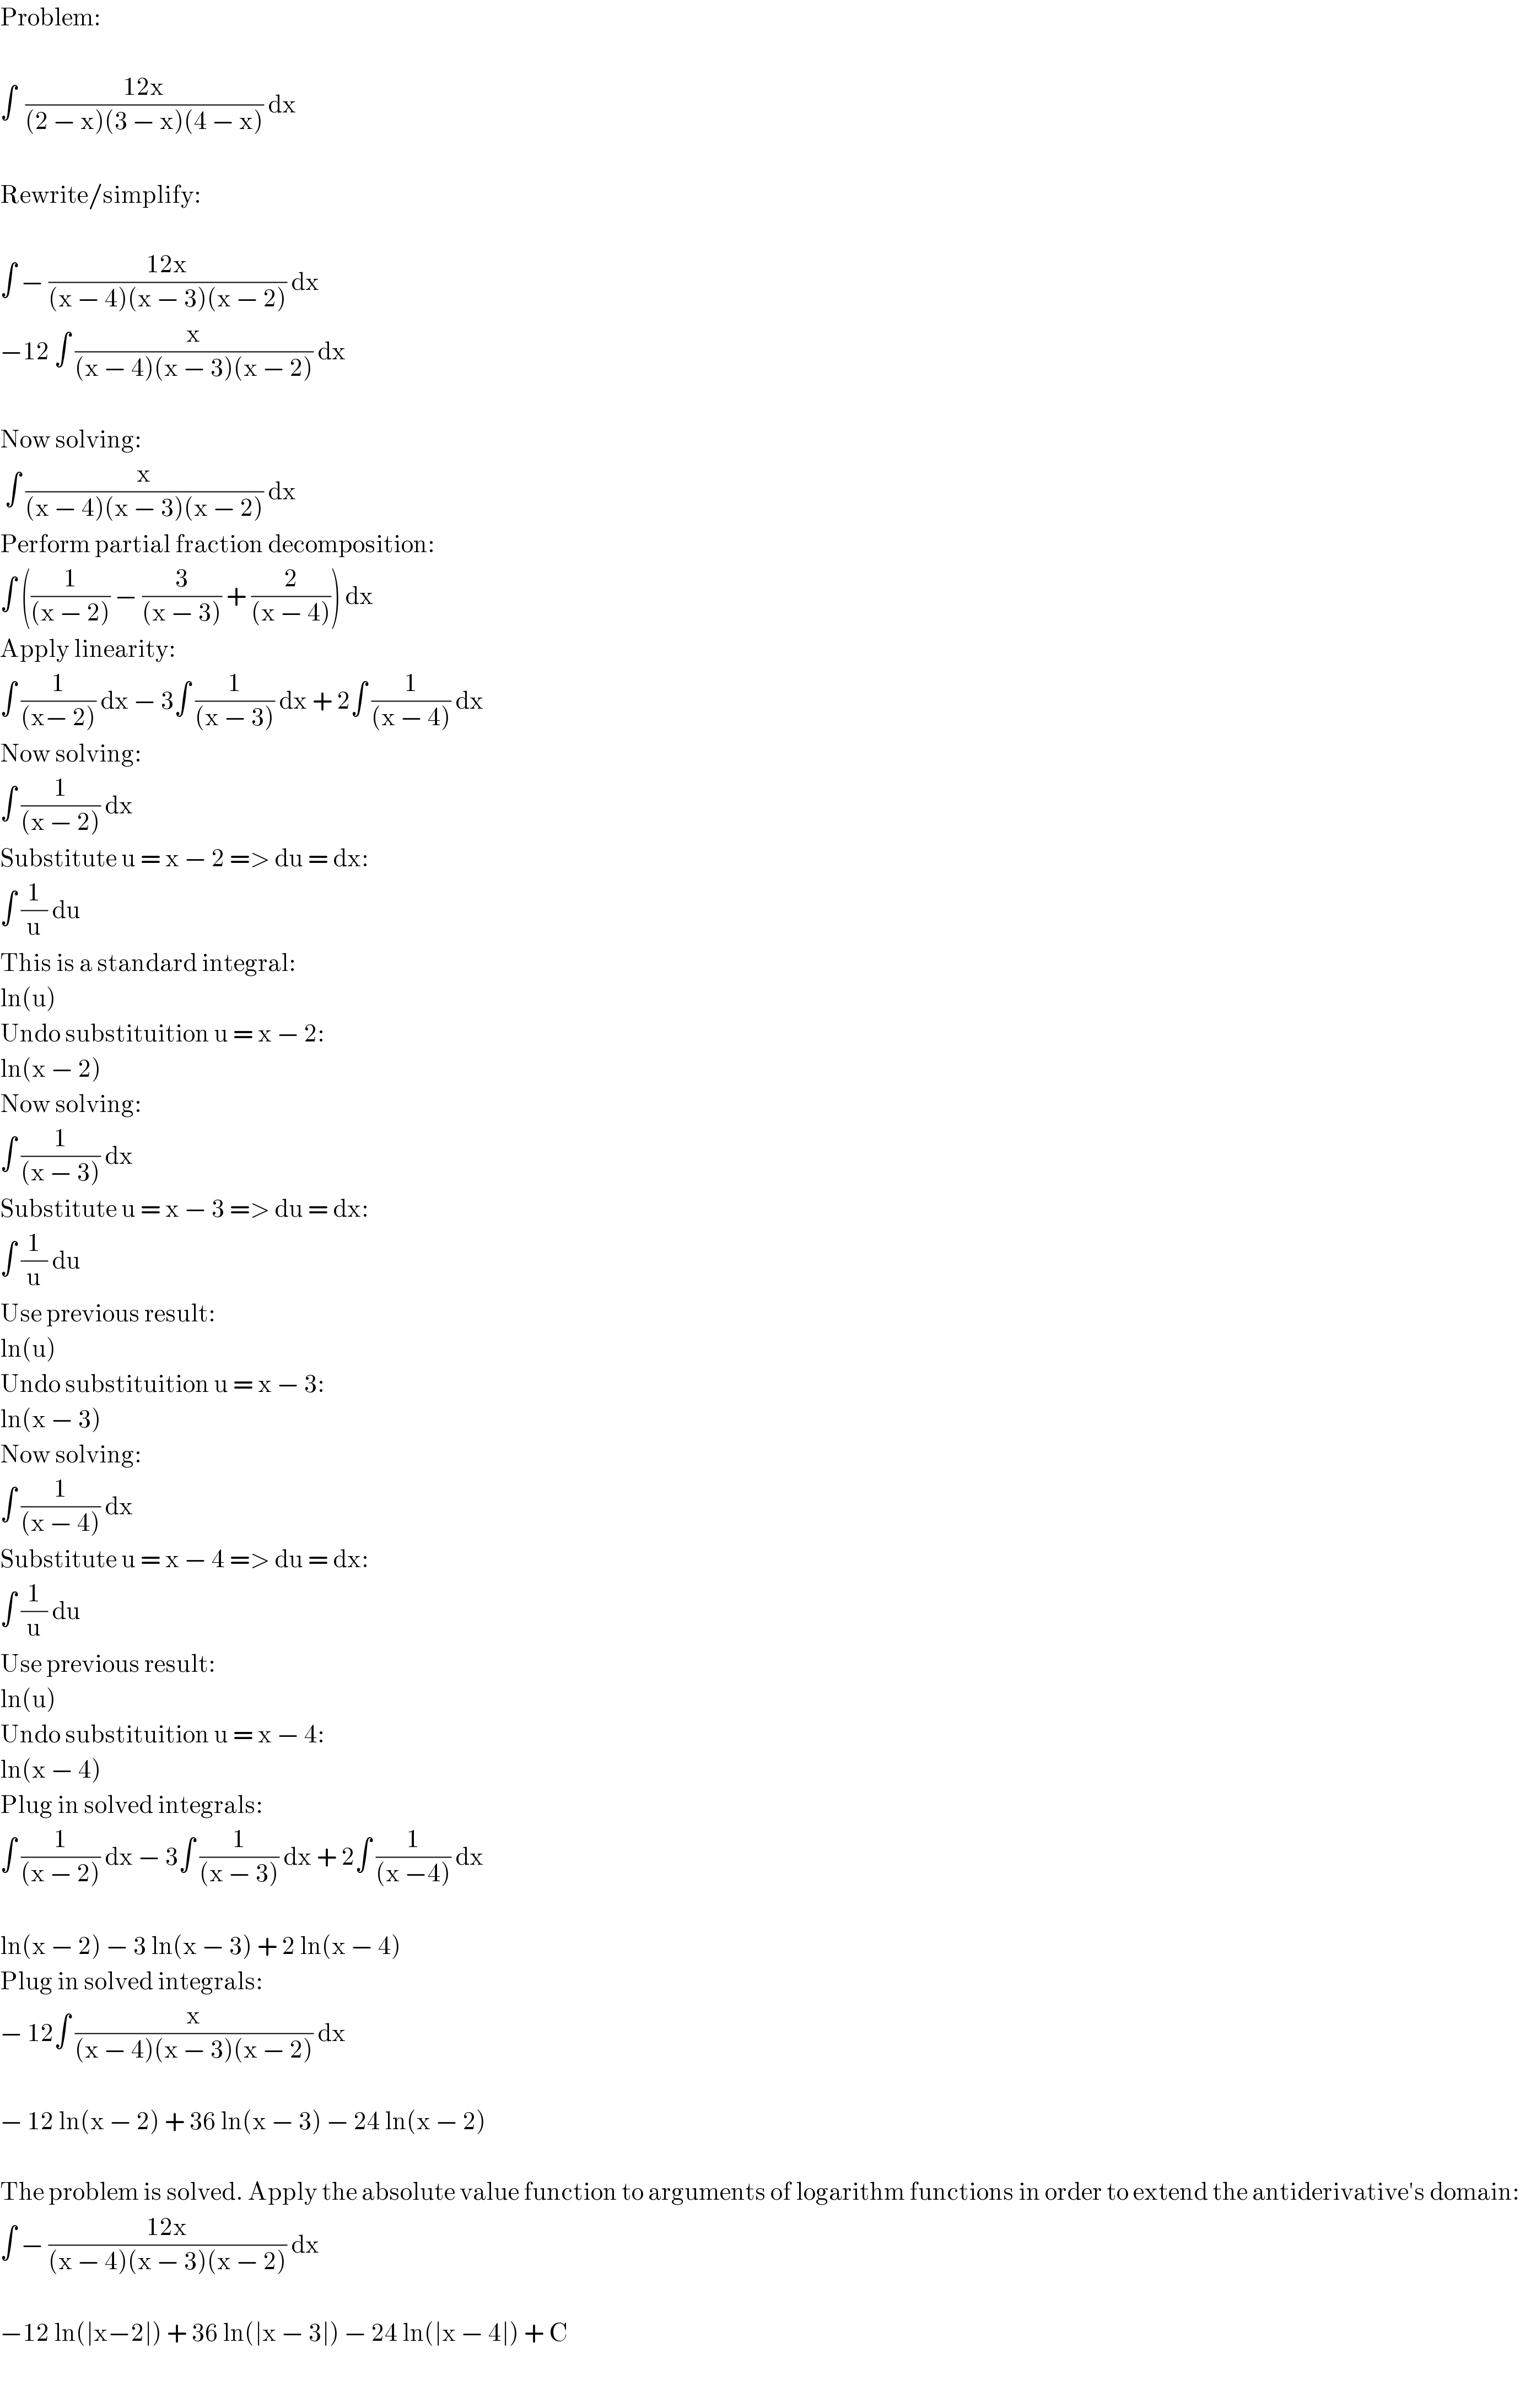 Problem:    ∫  ((12x)/((2 − x)(3 − x)(4 − x))) dx    Rewrite/simplify:    ∫ − ((12x)/((x − 4)(x − 3)(x − 2))) dx  −12 ∫ (x/((x − 4)(x − 3)(x − 2))) dx     Now solving:   ∫ (x/((x − 4)(x − 3)(x − 2))) dx  Perform partial fraction decomposition:  ∫ ((1/((x − 2))) − (3/((x − 3))) + (2/((x − 4)))) dx  Apply linearity:  ∫ (1/((x− 2))) dx − 3∫ (1/((x − 3))) dx + 2∫ (1/((x − 4))) dx  Now solving:  ∫ (1/((x − 2))) dx  Substitute u = x − 2 => du = dx:  ∫ (1/u) du   This is a standard integral:  ln(u)  Undo substituition u = x − 2:  ln(x − 2)  Now solving:  ∫ (1/((x − 3))) dx  Substitute u = x − 3 => du = dx:  ∫ (1/u) du  Use previous result:  ln(u)  Undo substituition u = x − 3:  ln(x − 3)  Now solving:  ∫ (1/((x − 4))) dx  Substitute u = x − 4 => du = dx:  ∫ (1/u) du  Use previous result:  ln(u)  Undo substituition u = x − 4:  ln(x − 4)  Plug in solved integrals:  ∫ (1/((x − 2))) dx − 3∫ (1/((x − 3))) dx + 2∫ (1/((x −4))) dx    ln(x − 2) − 3 ln(x − 3) + 2 ln(x − 4)  Plug in solved integrals:  − 12∫ (x/((x − 4)(x − 3)(x − 2))) dx    − 12 ln(x − 2) + 36 ln(x − 3) − 24 ln(x − 2)    The problem is solved. Apply the absolute value function to arguments of logarithm functions in order to extend the antiderivative′s domain:  ∫ − ((12x)/((x − 4)(x − 3)(x − 2))) dx    −12 ln(∣x−2∣) + 36 ln(∣x − 3∣) − 24 ln(∣x − 4∣) + C  